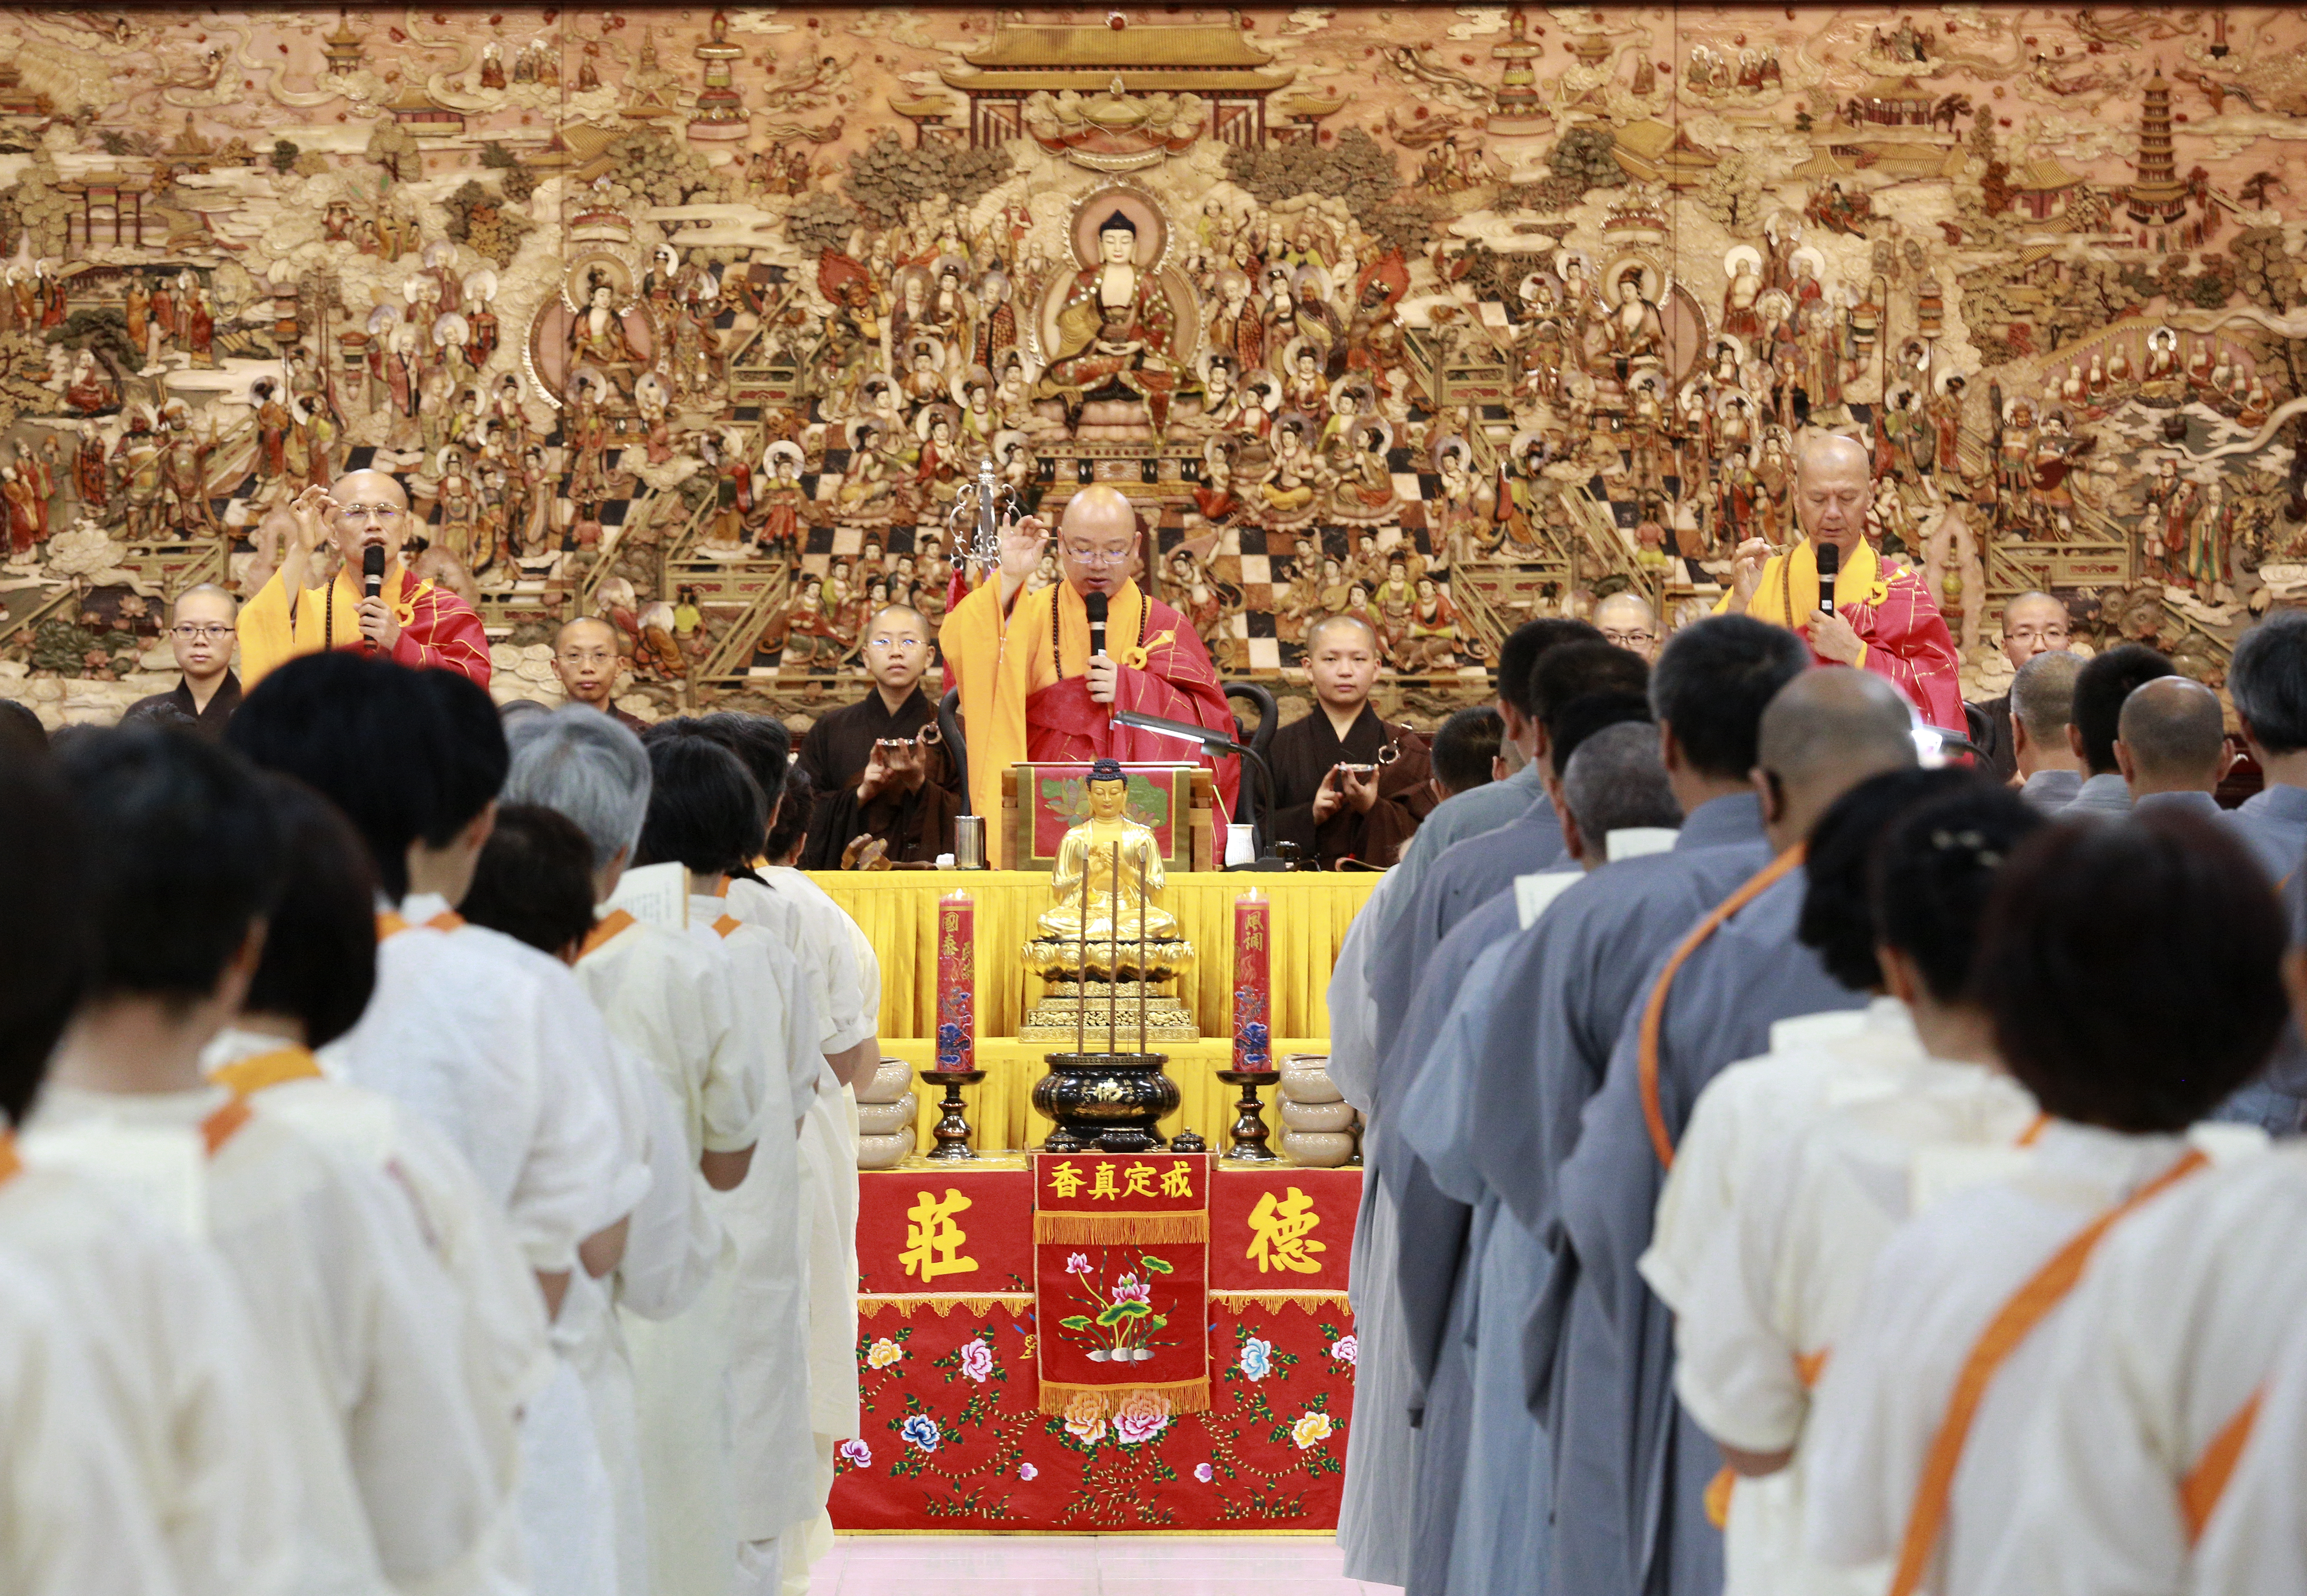 The witnessing master welcomes new preceptees at the conferring the precepts ritual in the main shrine room, Fo Guang Shan Headquarters, 2016. Photo by Life News Agency.